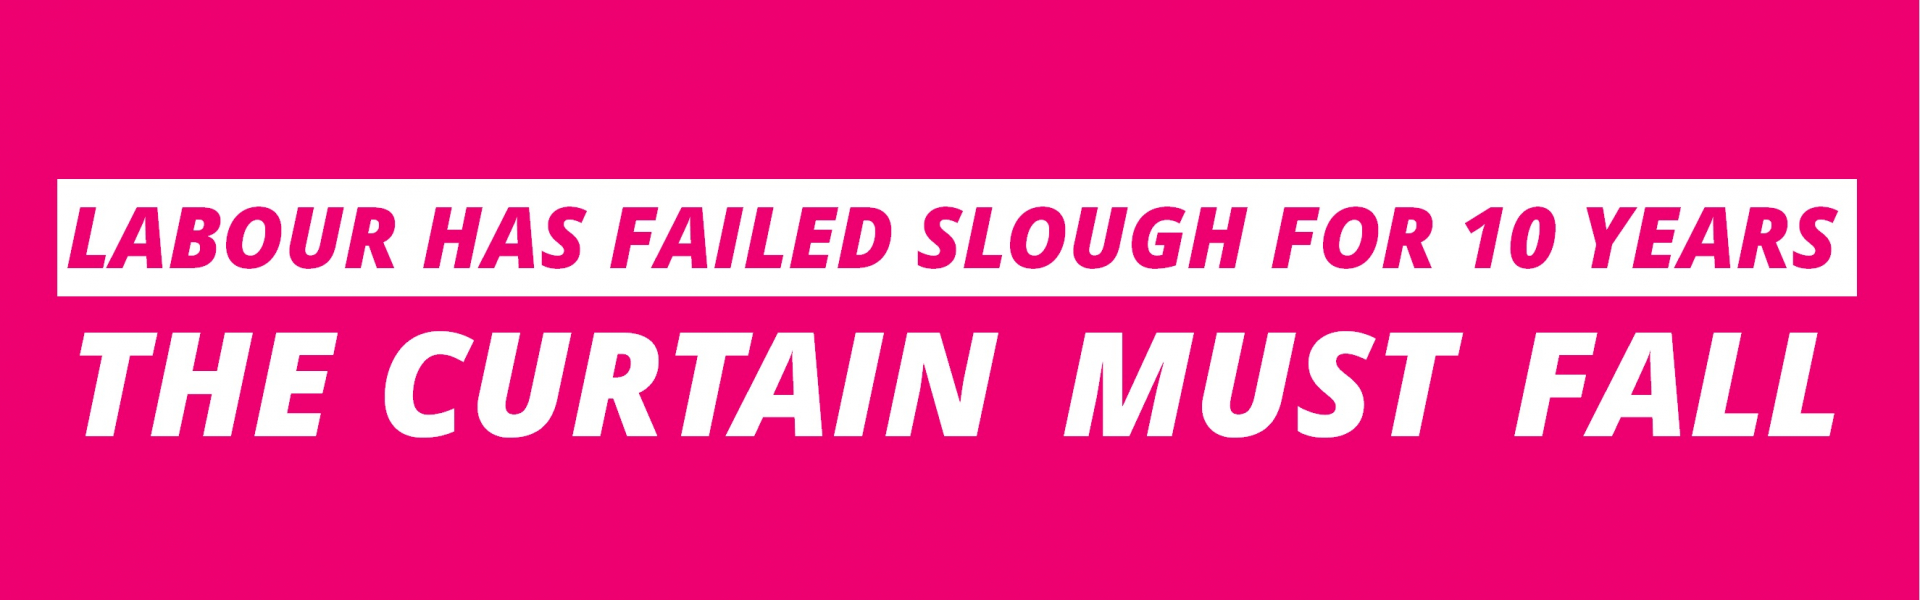 Slough Labour The Curtain Must Fall